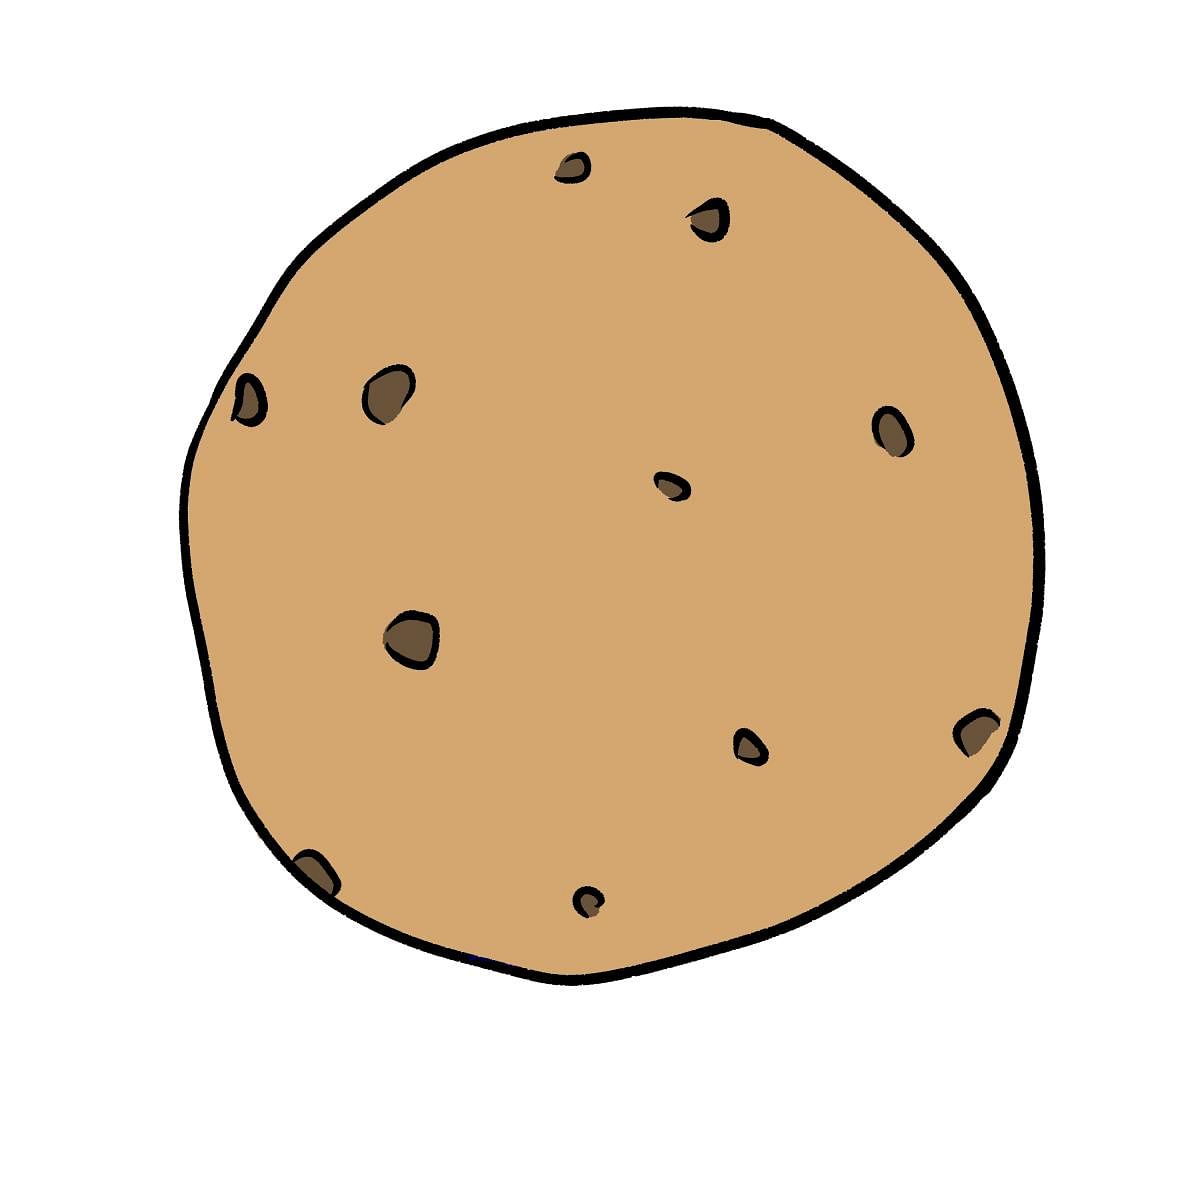 Choco chip cookie. Illustration by Pallavi NB